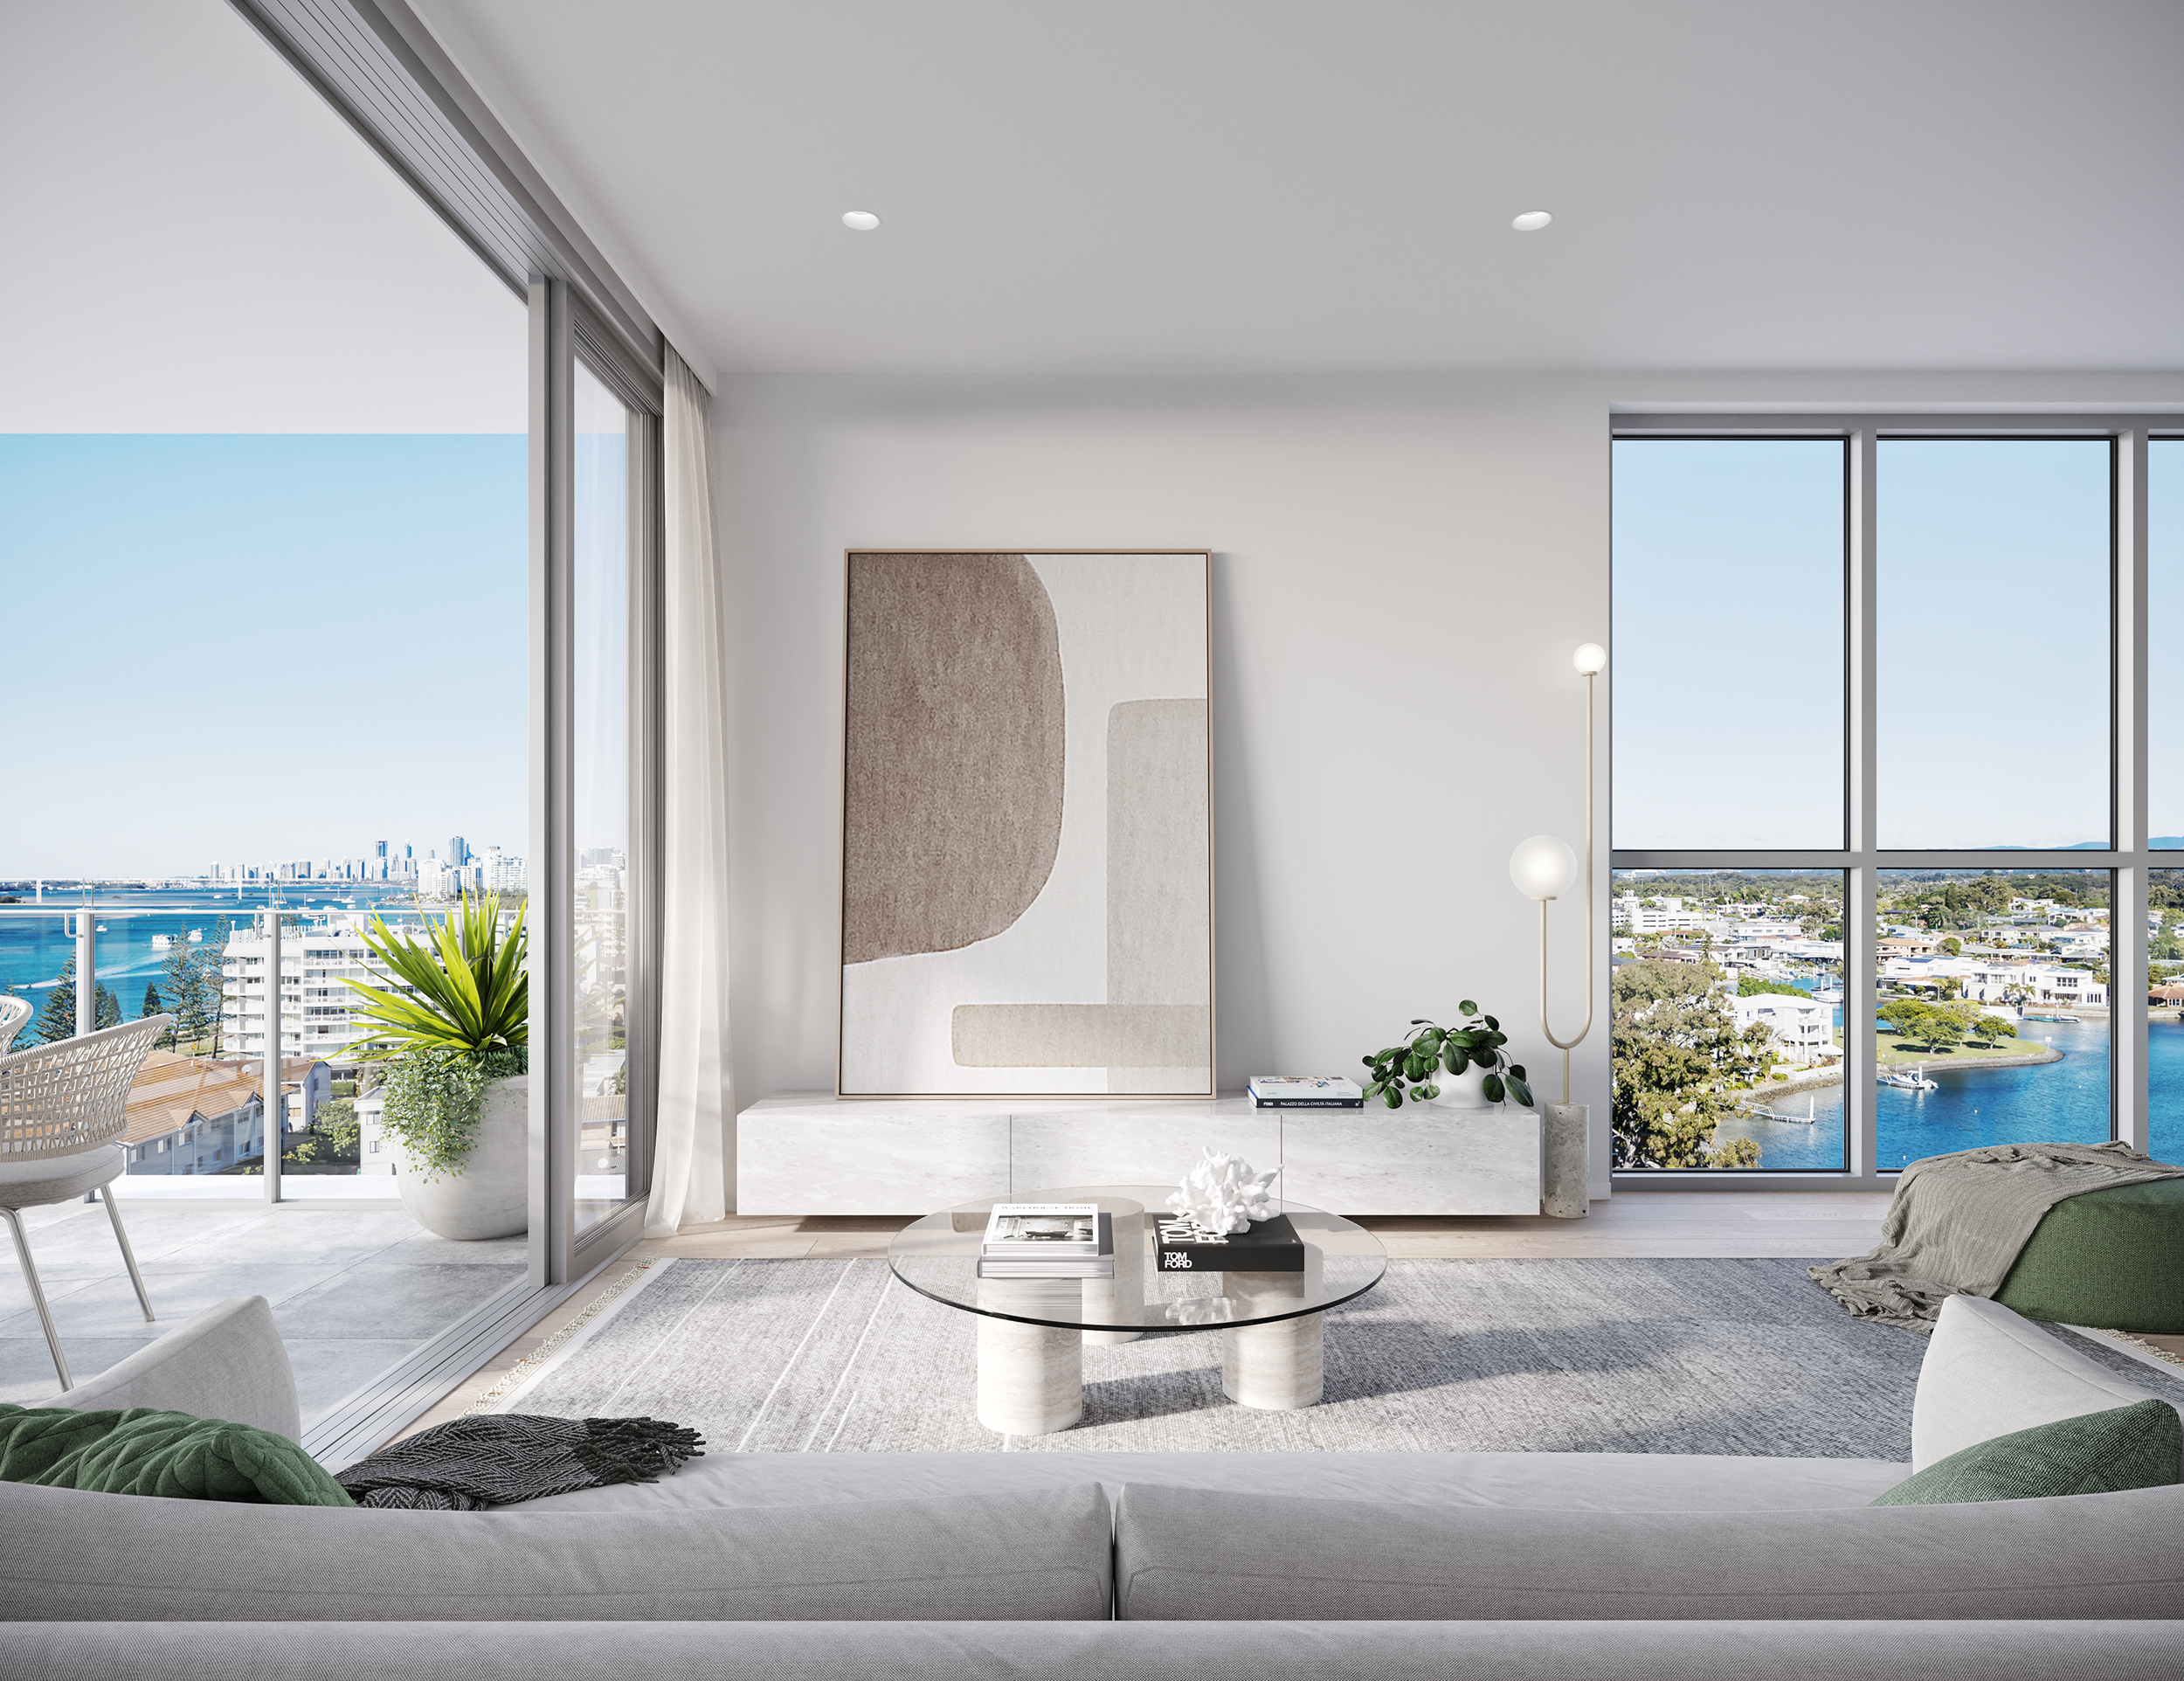 Inviting apartment living room with a large sliding door that opens up to a balcony, offering panoramic views of the ocean and the stunning Gold Coast skyline. The room's color palette reflects the coastal proximity, creating a beach-inspired ambiance.